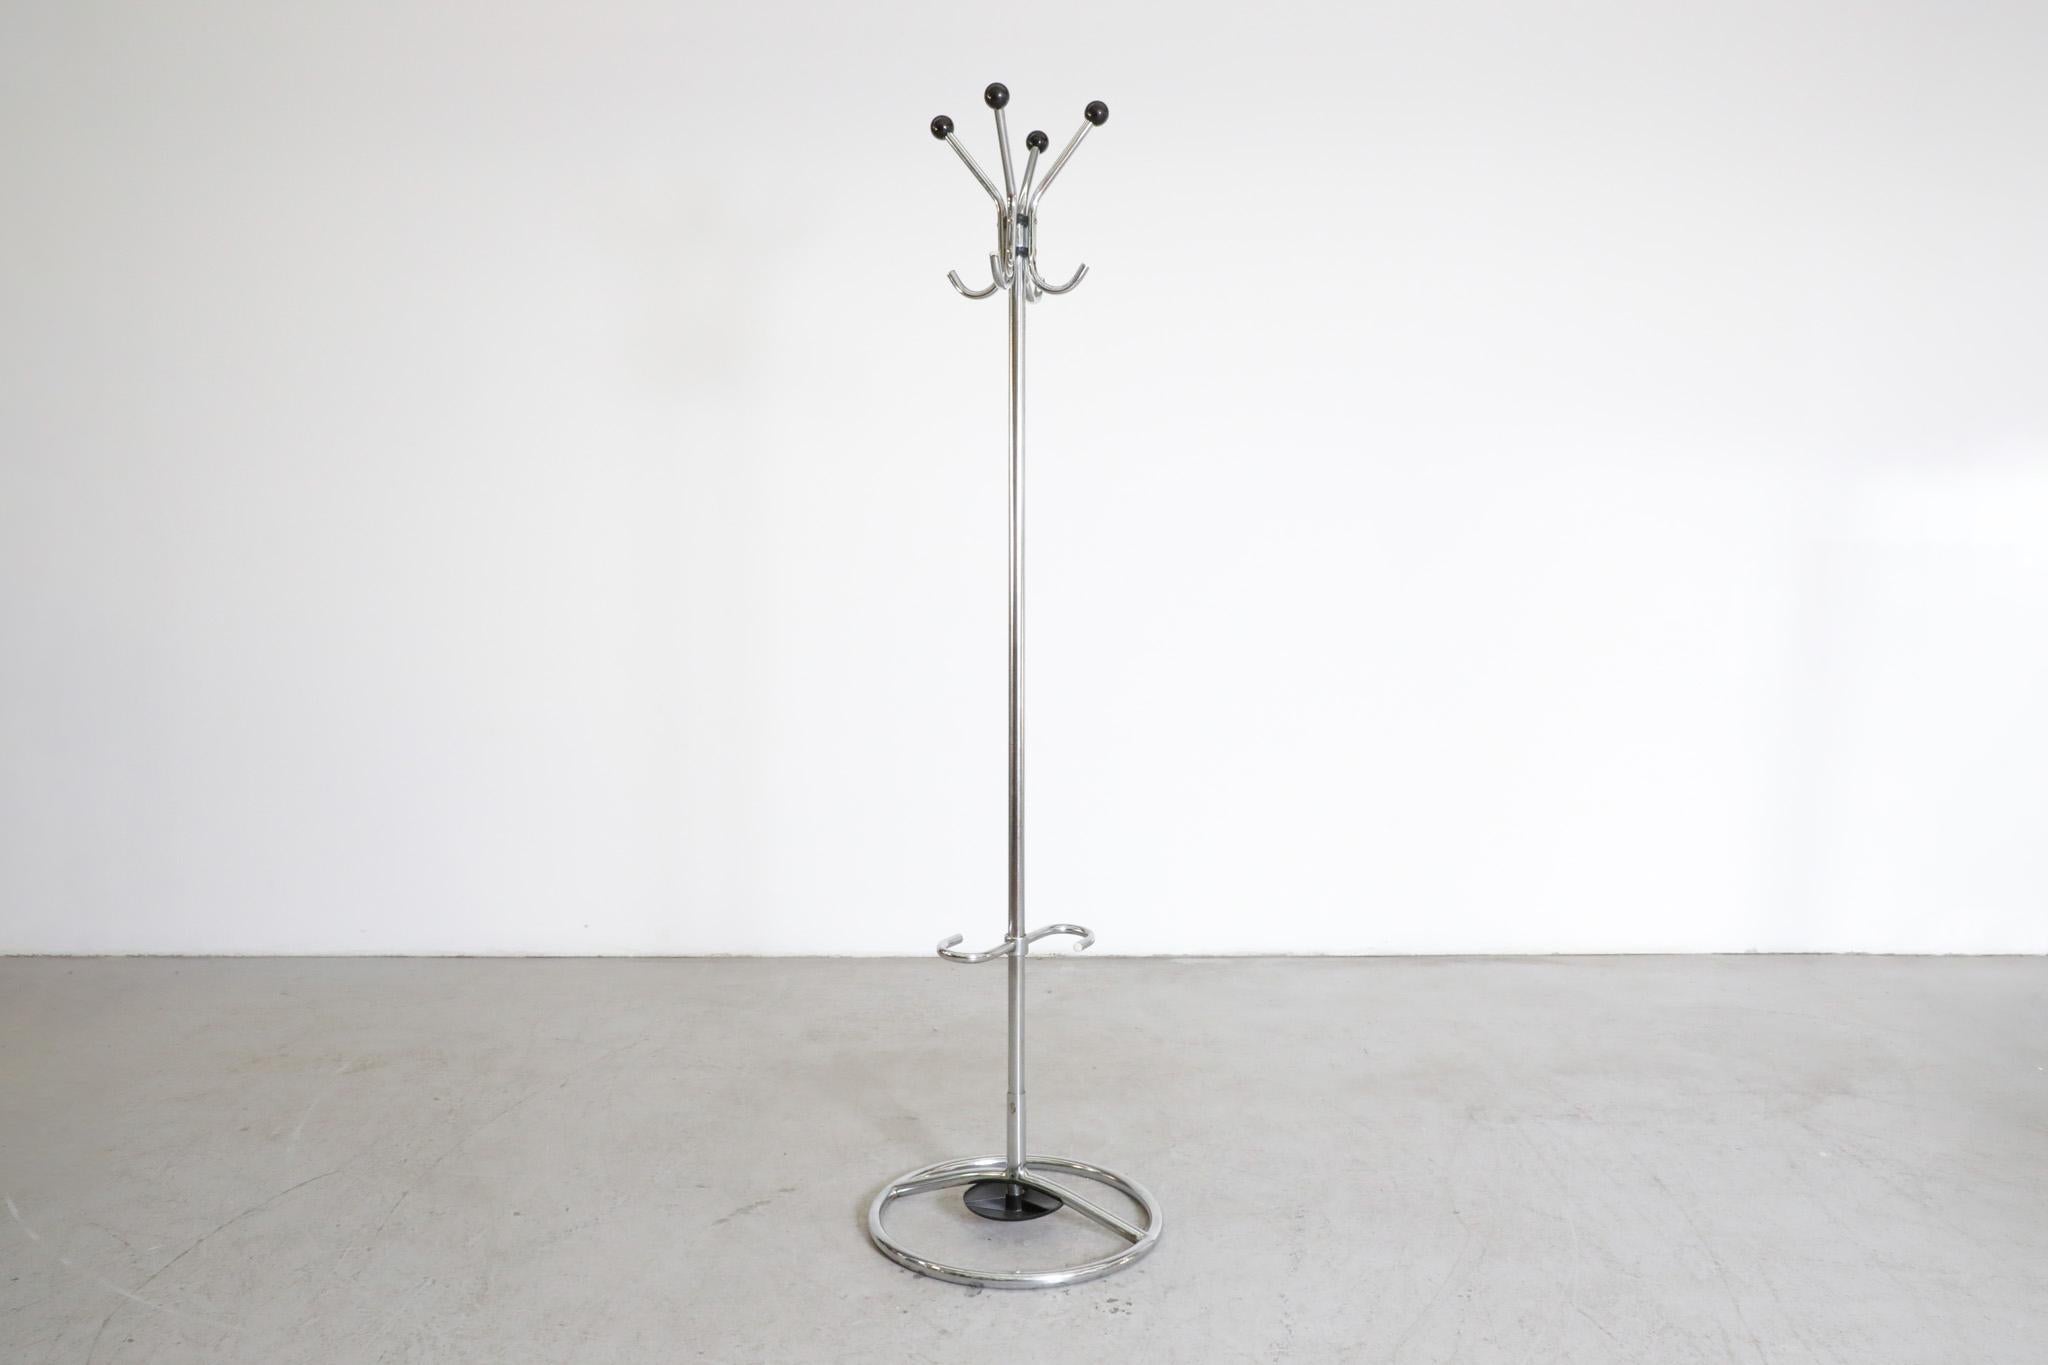 Bauhaus, black and chrome coat stand attributed to famed Czech designer Slezák, 1930s. This standing coat rack has hooks at the top for coats and bags with a curved umbrella stand at the base. Beautifully simplistic design. In good original